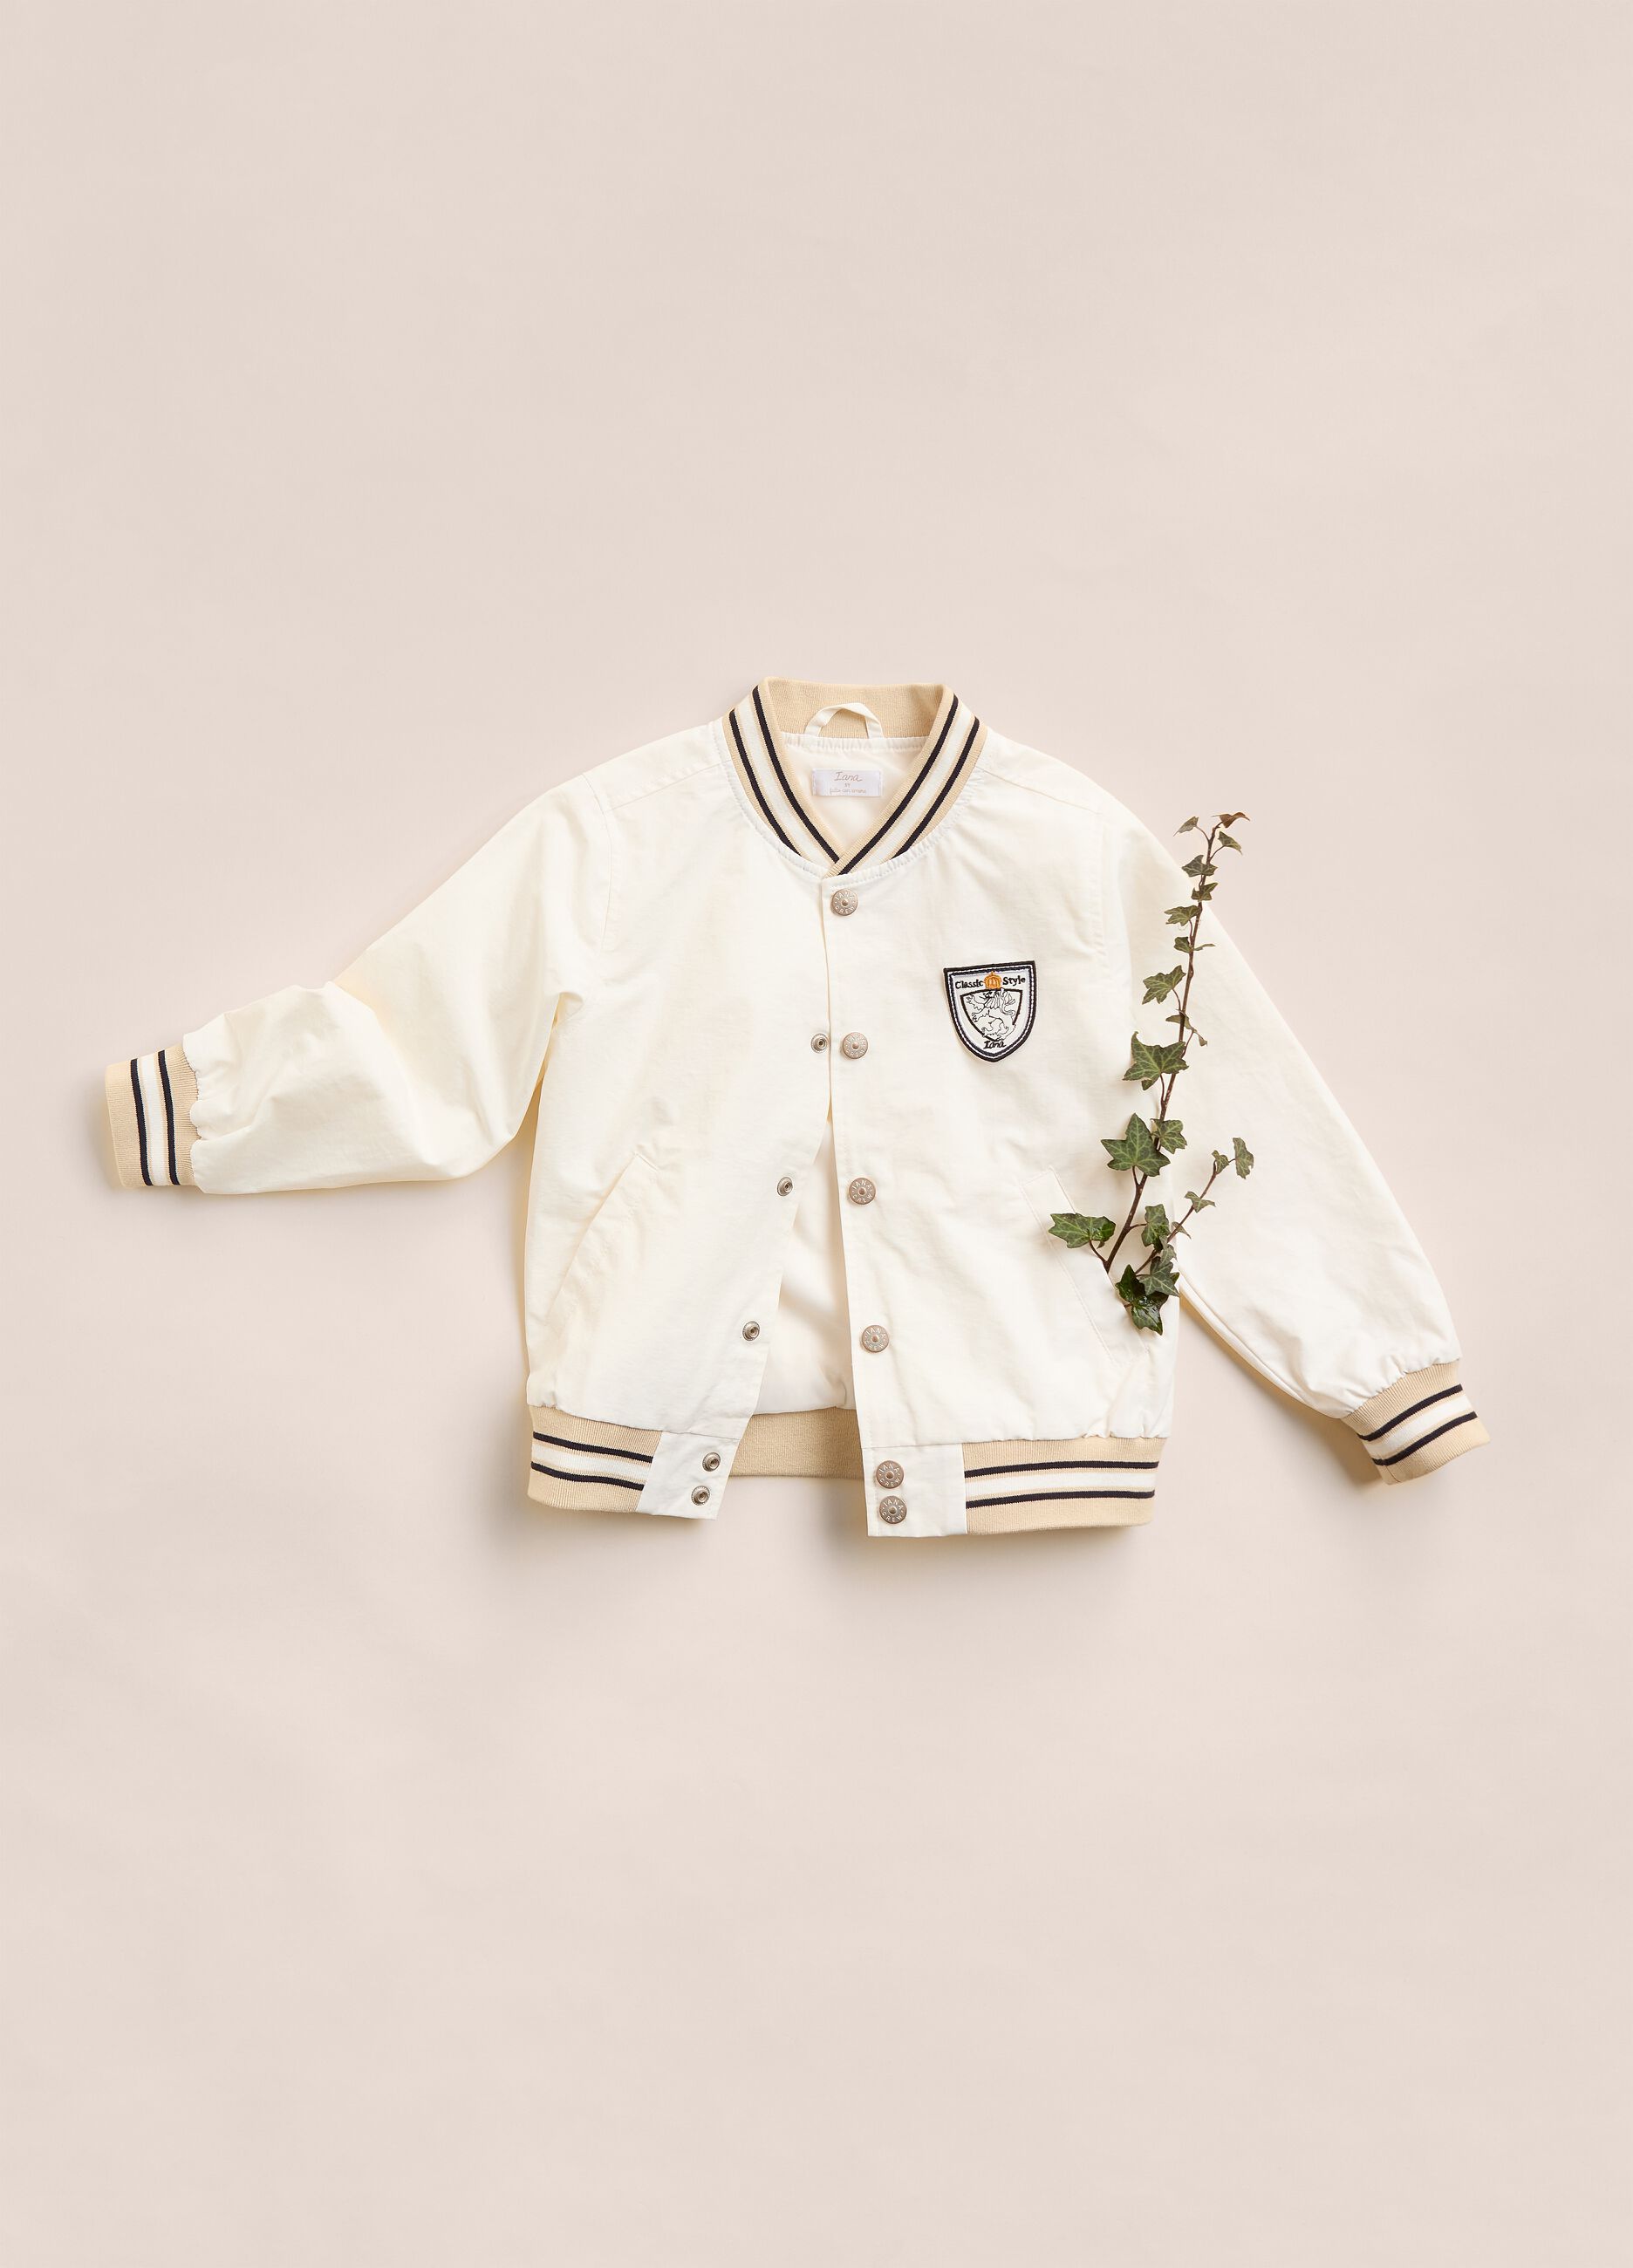 IANA bomber jacket in cotton blend with crest